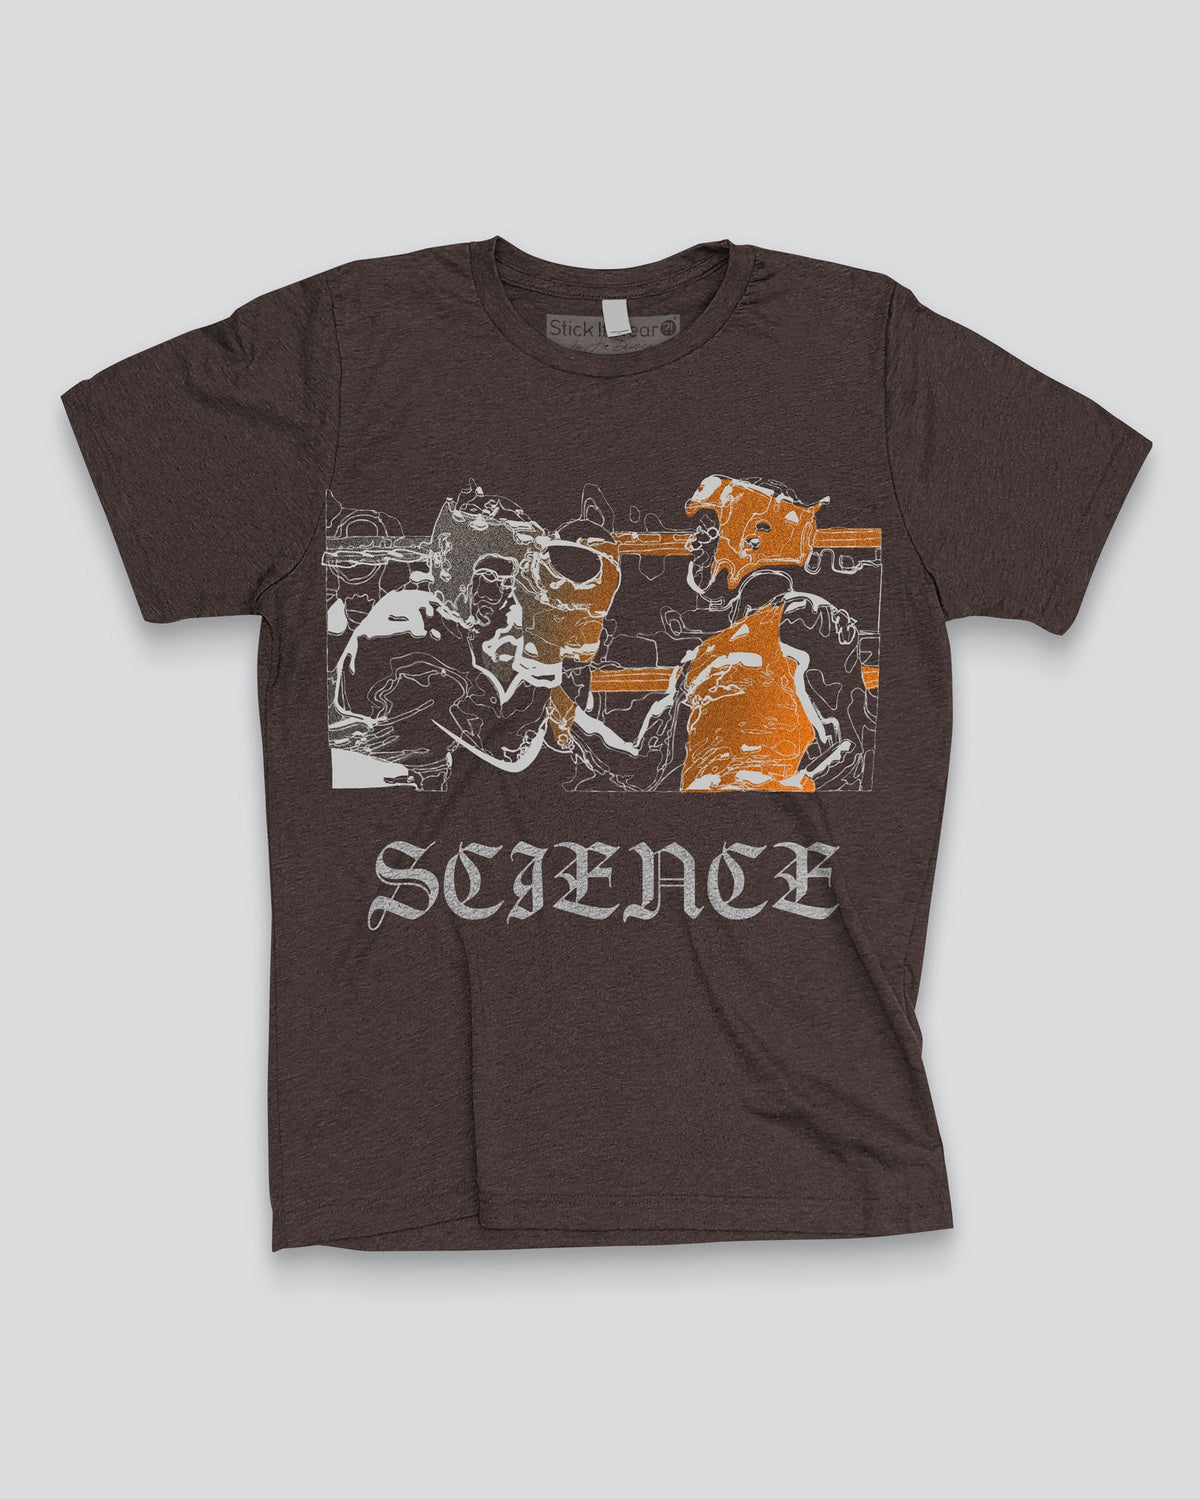 SWEET SCIENCE Front Row Boxing T-Shirt